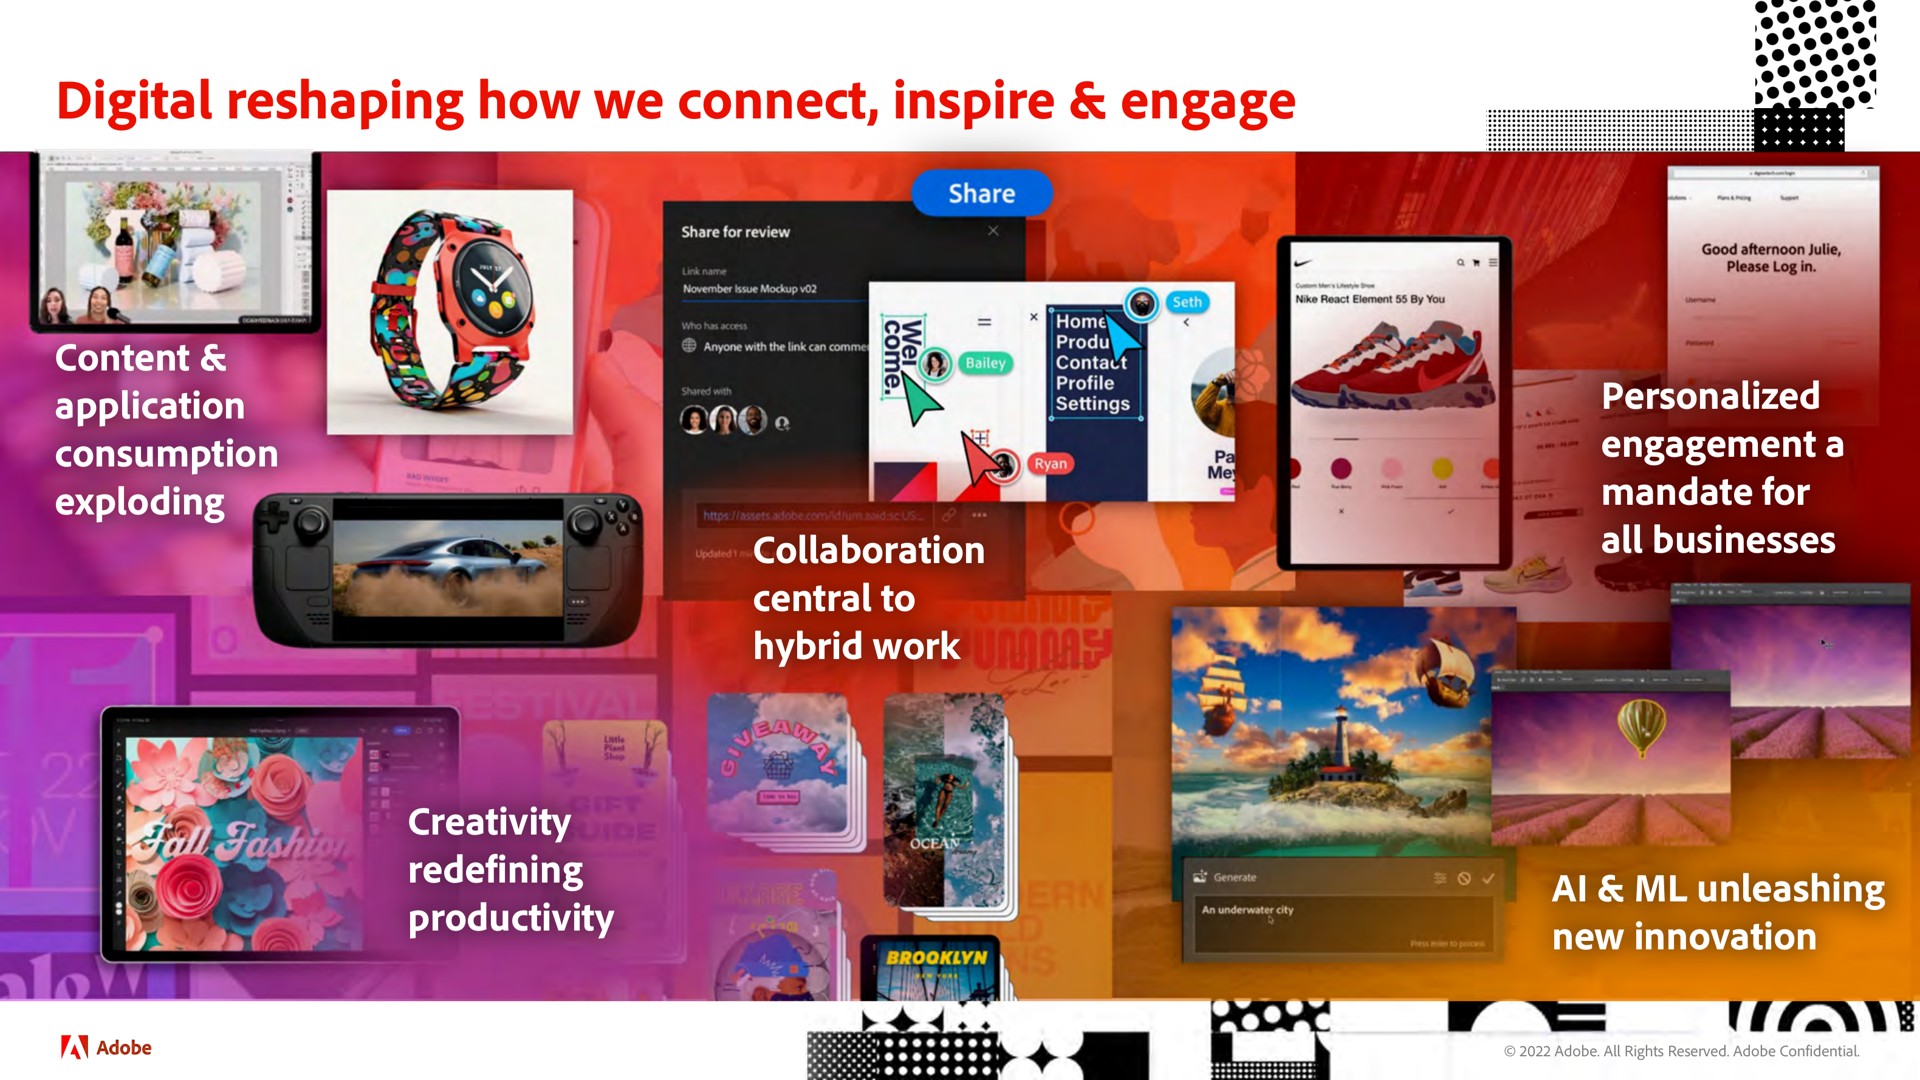 digital reshaping how we connect inspire engage going ale nea cee its | Adobe